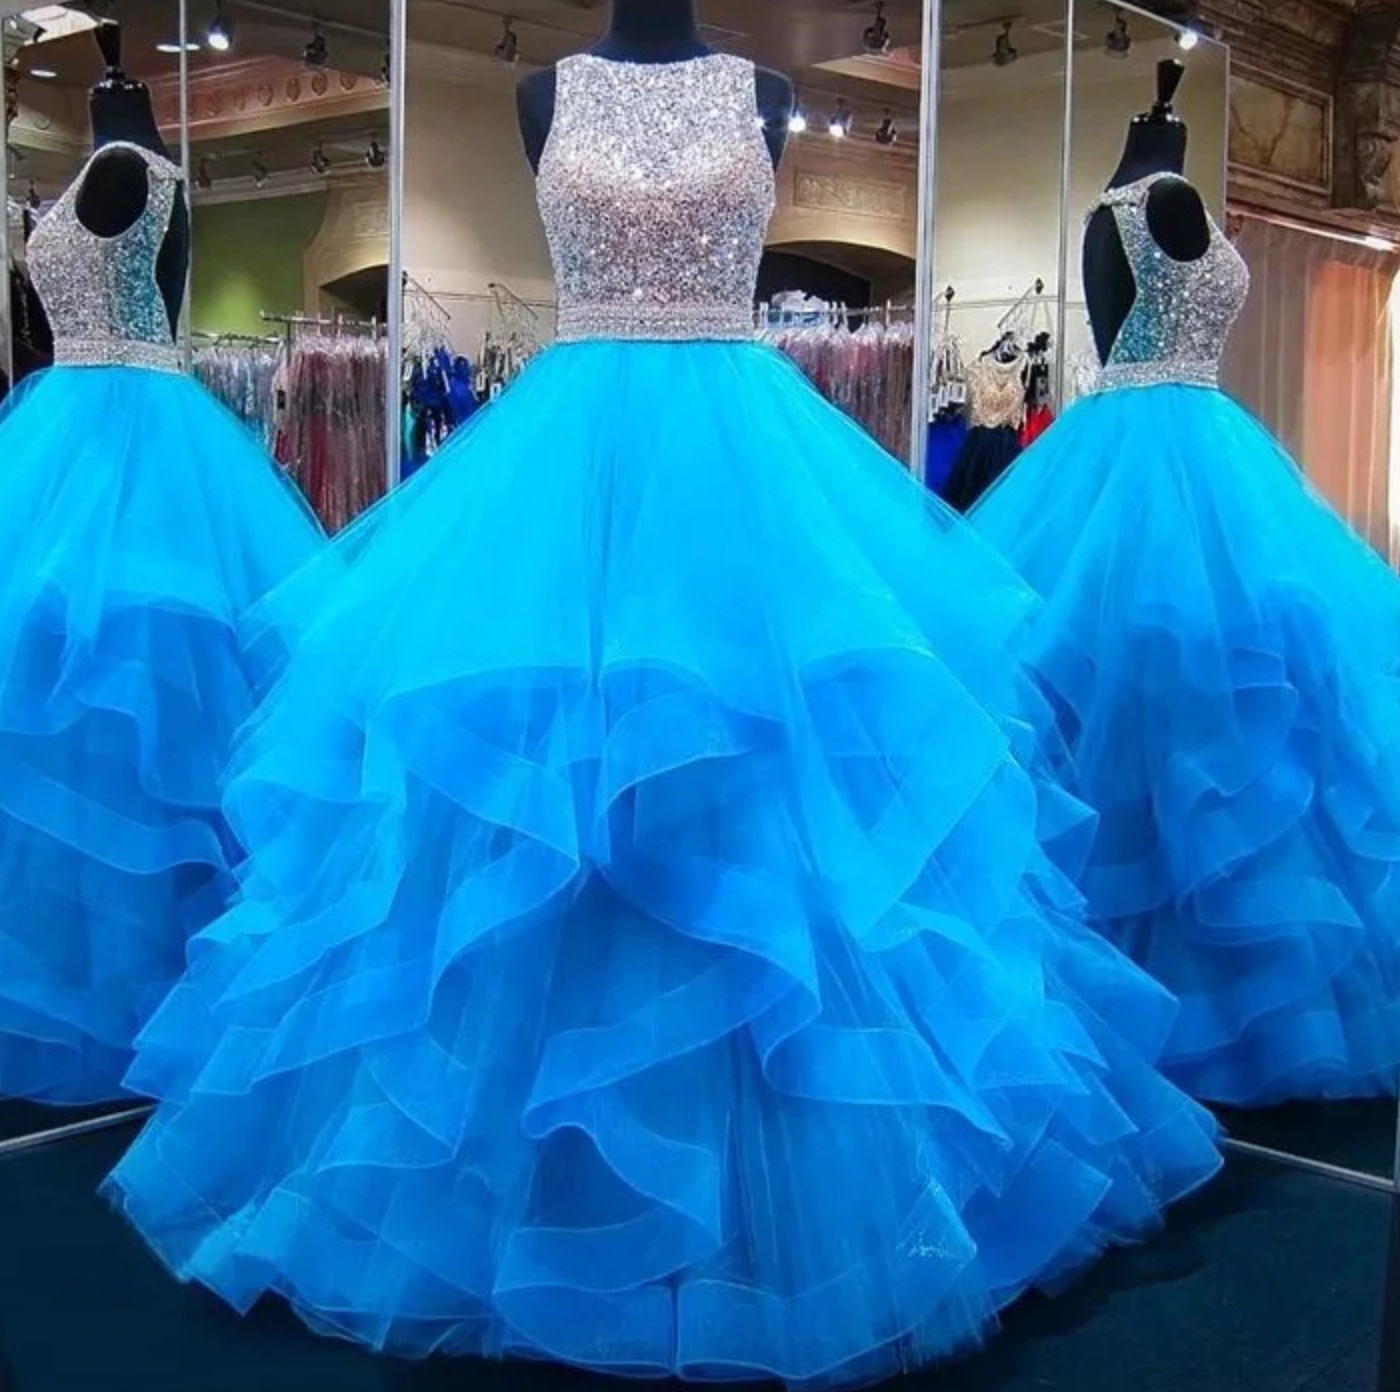 Crystals Quinceañera Dress Ball Gown Ruffled Sequin  Sweet 16 Dress - TulleLux Bridal Crowns &  Accessories 